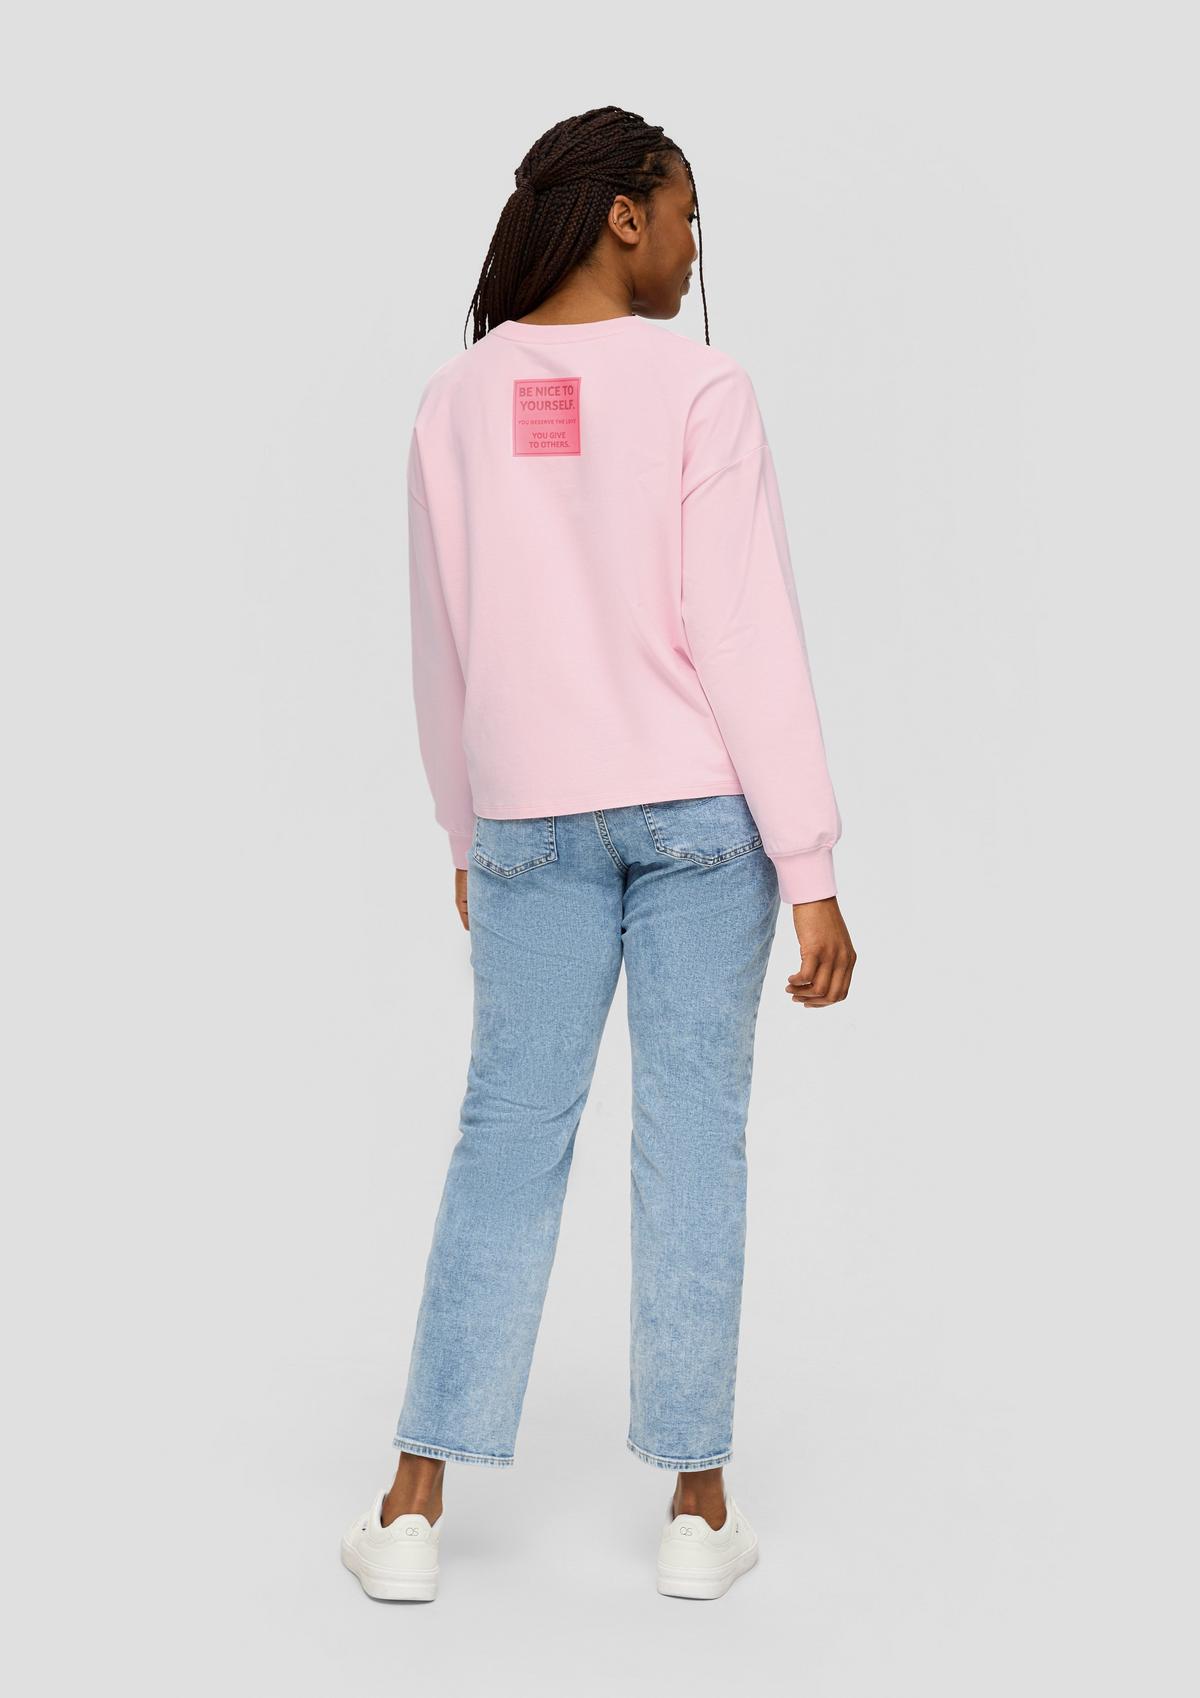 s.Oliver Sweatshirt in a boxy cut with a back print